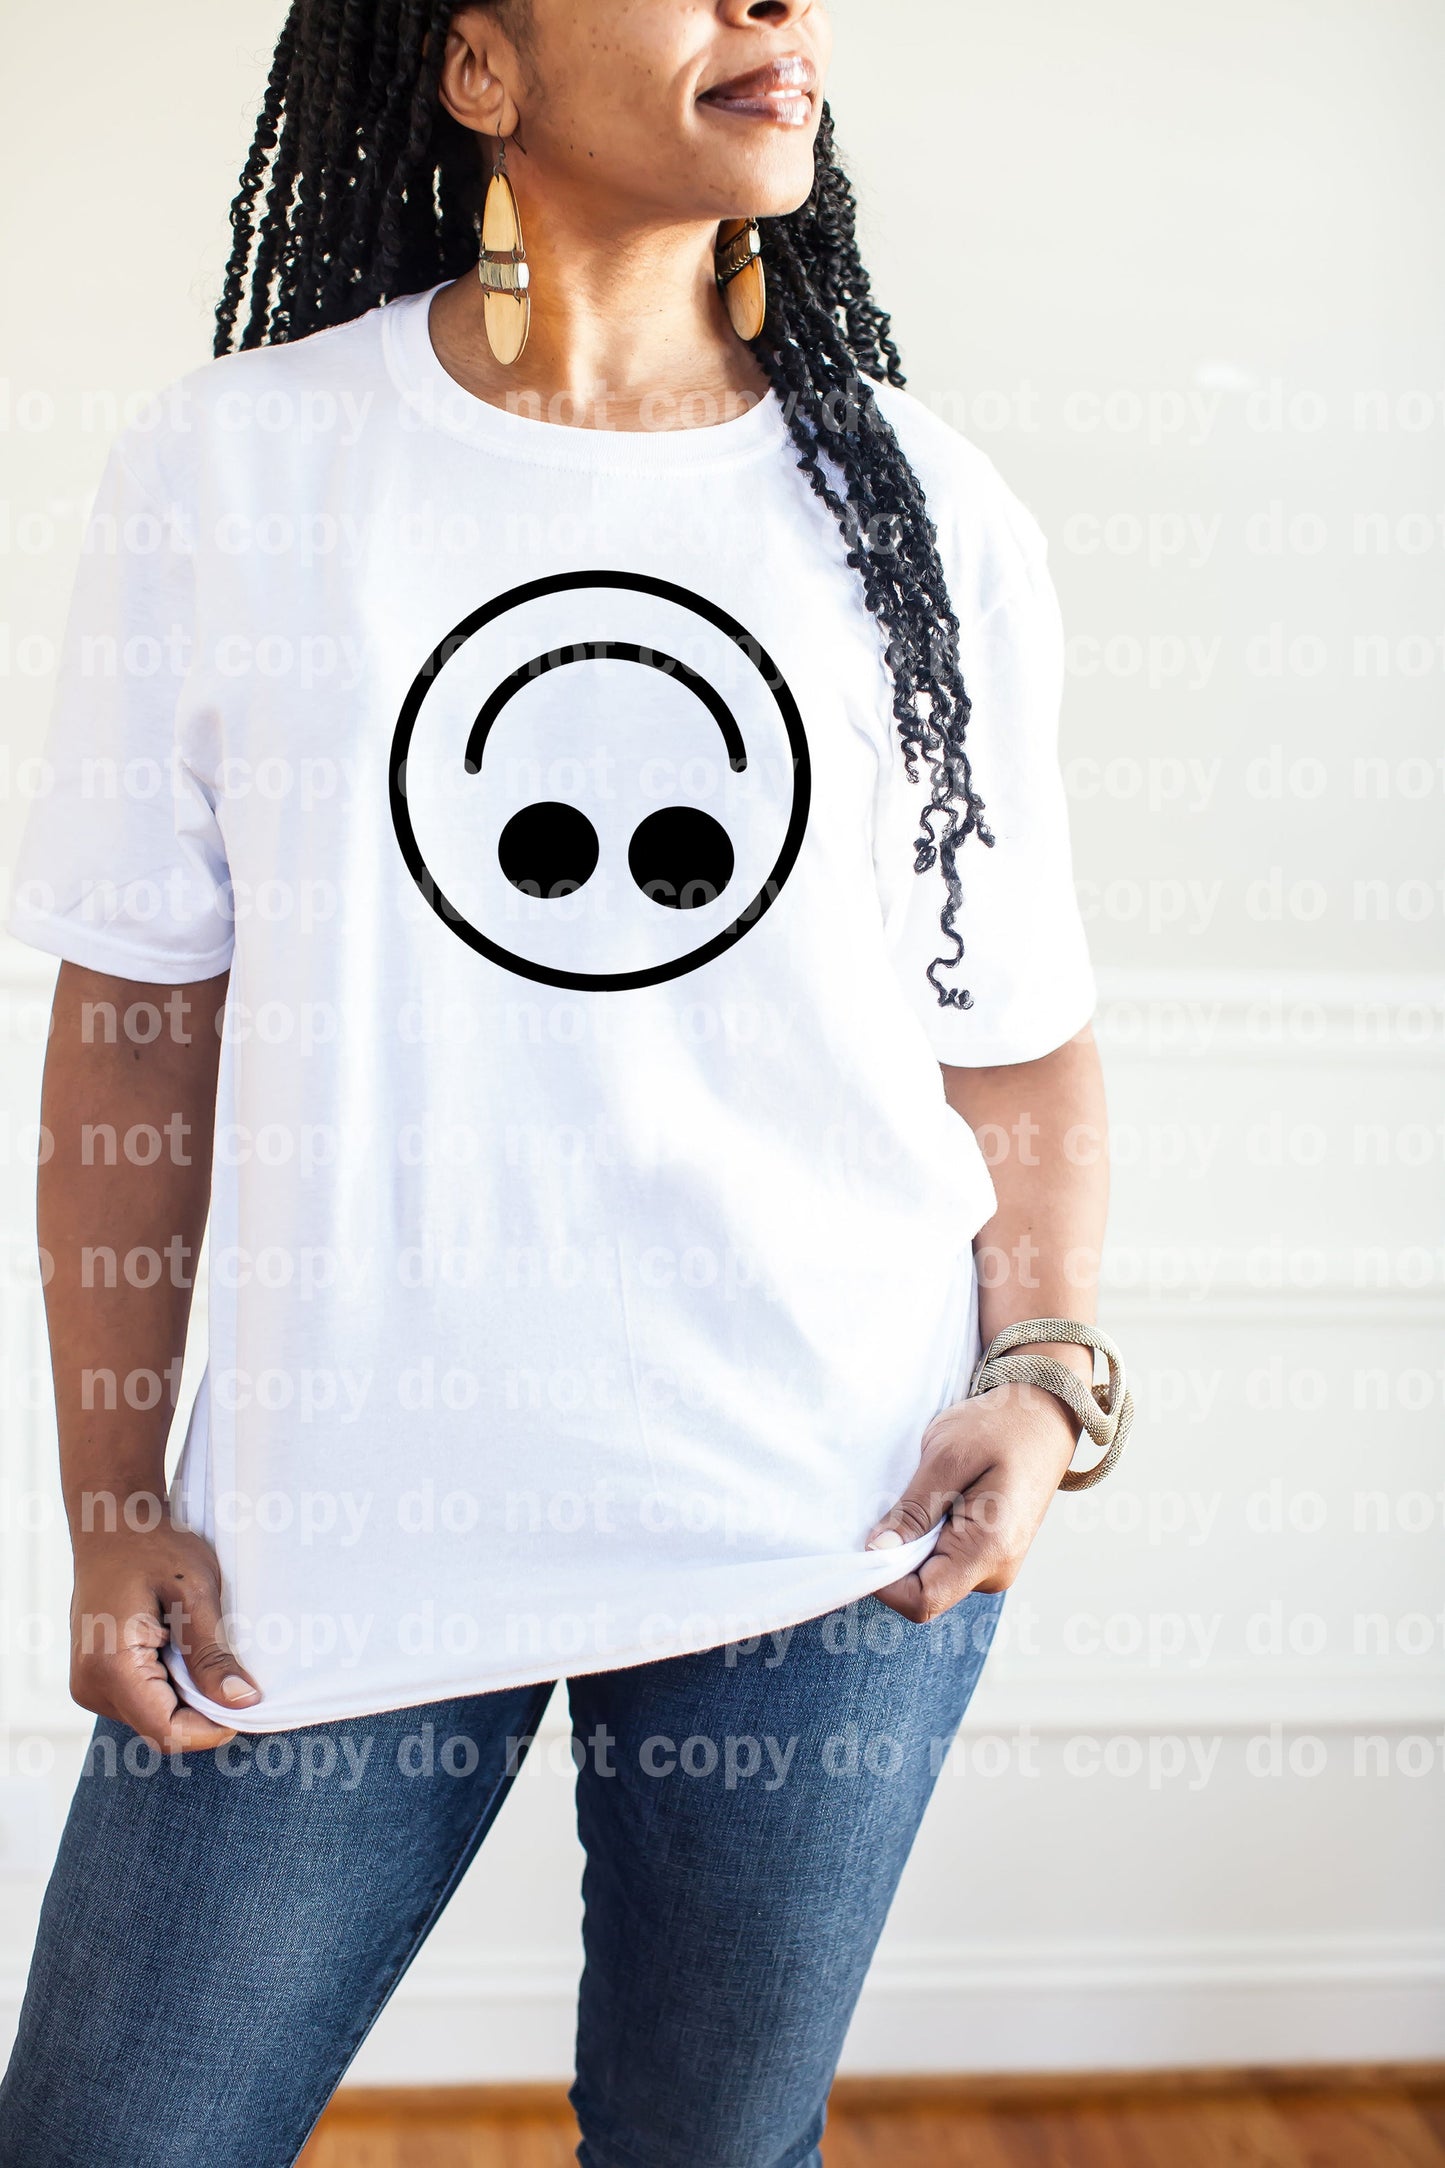 Upside Down Smiley Dream Print or Sublimation Print